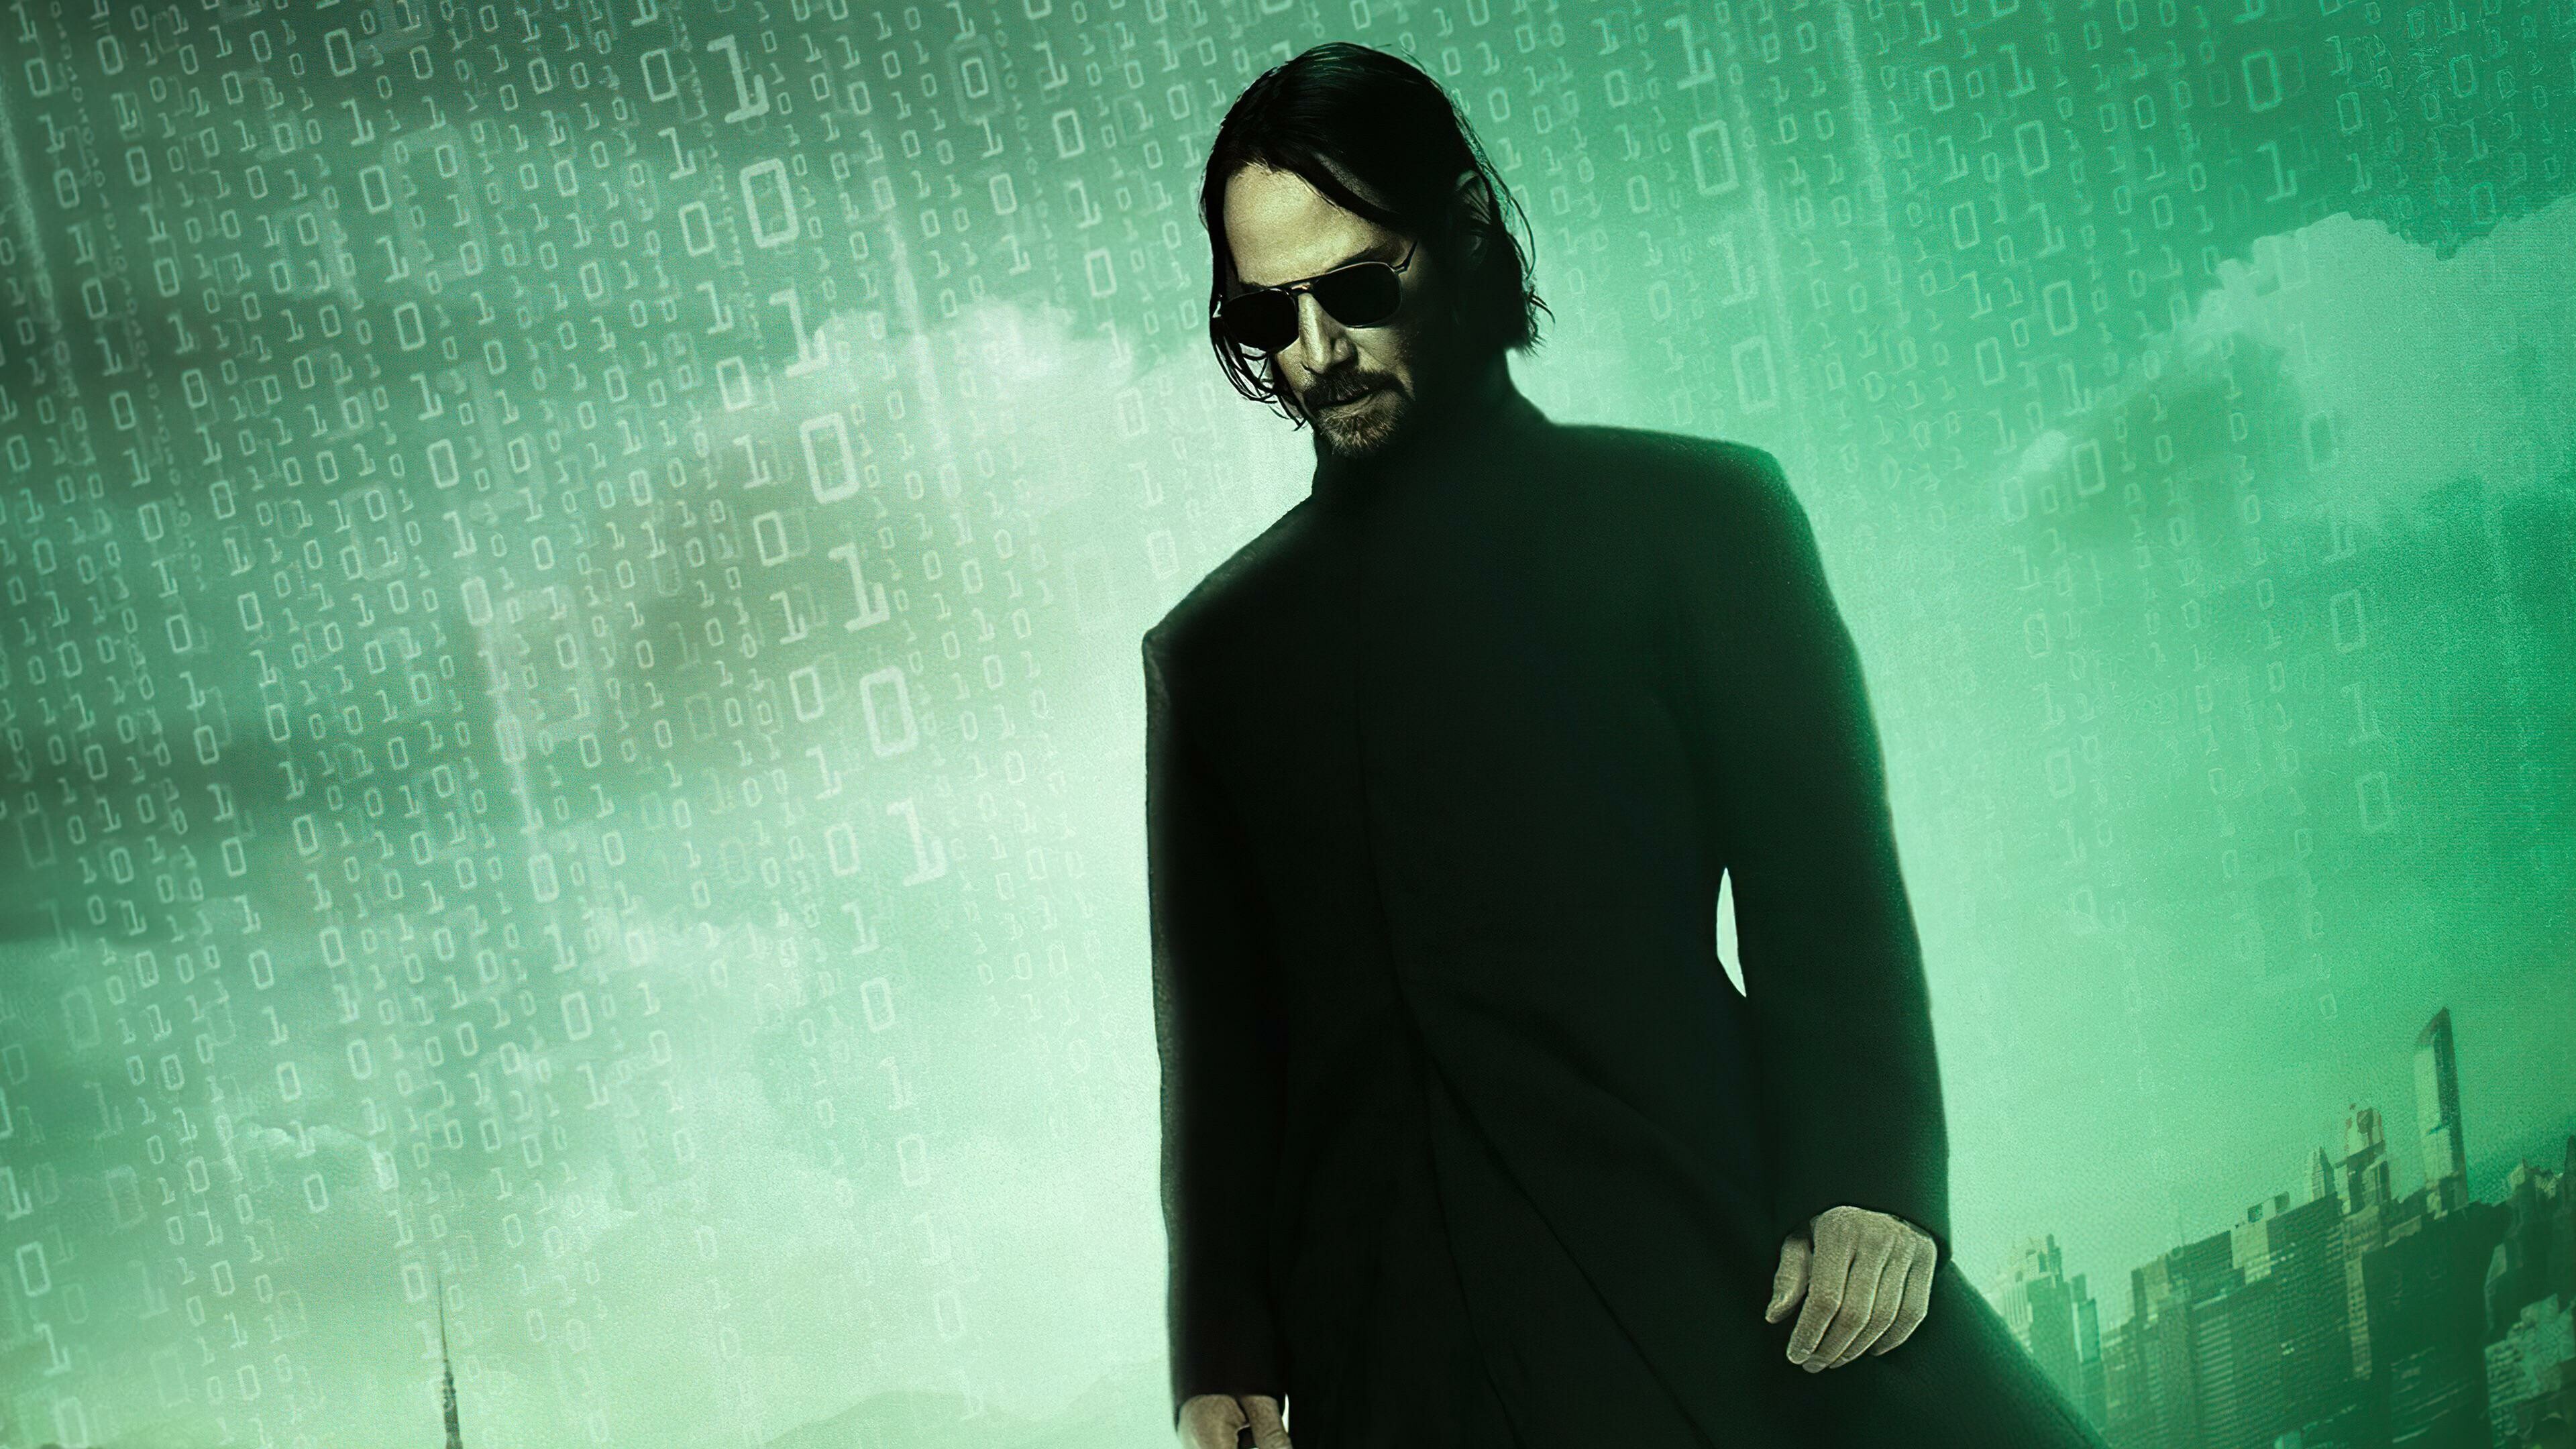 The Matrix Resurrections: Keanu Reeves as Neo and Thomas Anderson, The protagonist. 3840x2160 4K Wallpaper.